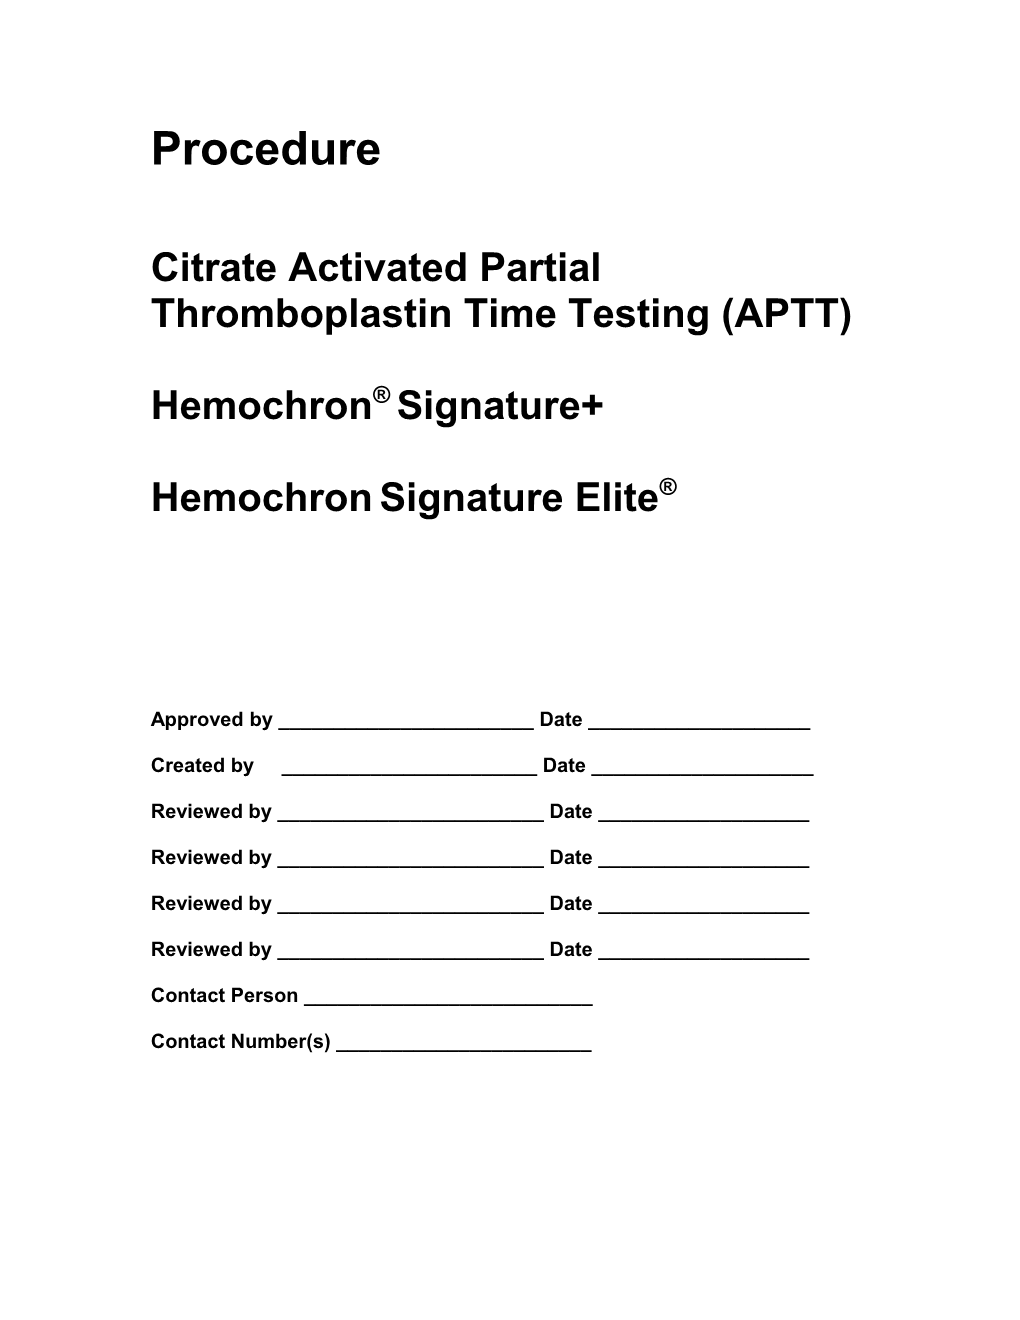 Citrate Activated Partial Thromboplastin Time Testing (APTT)